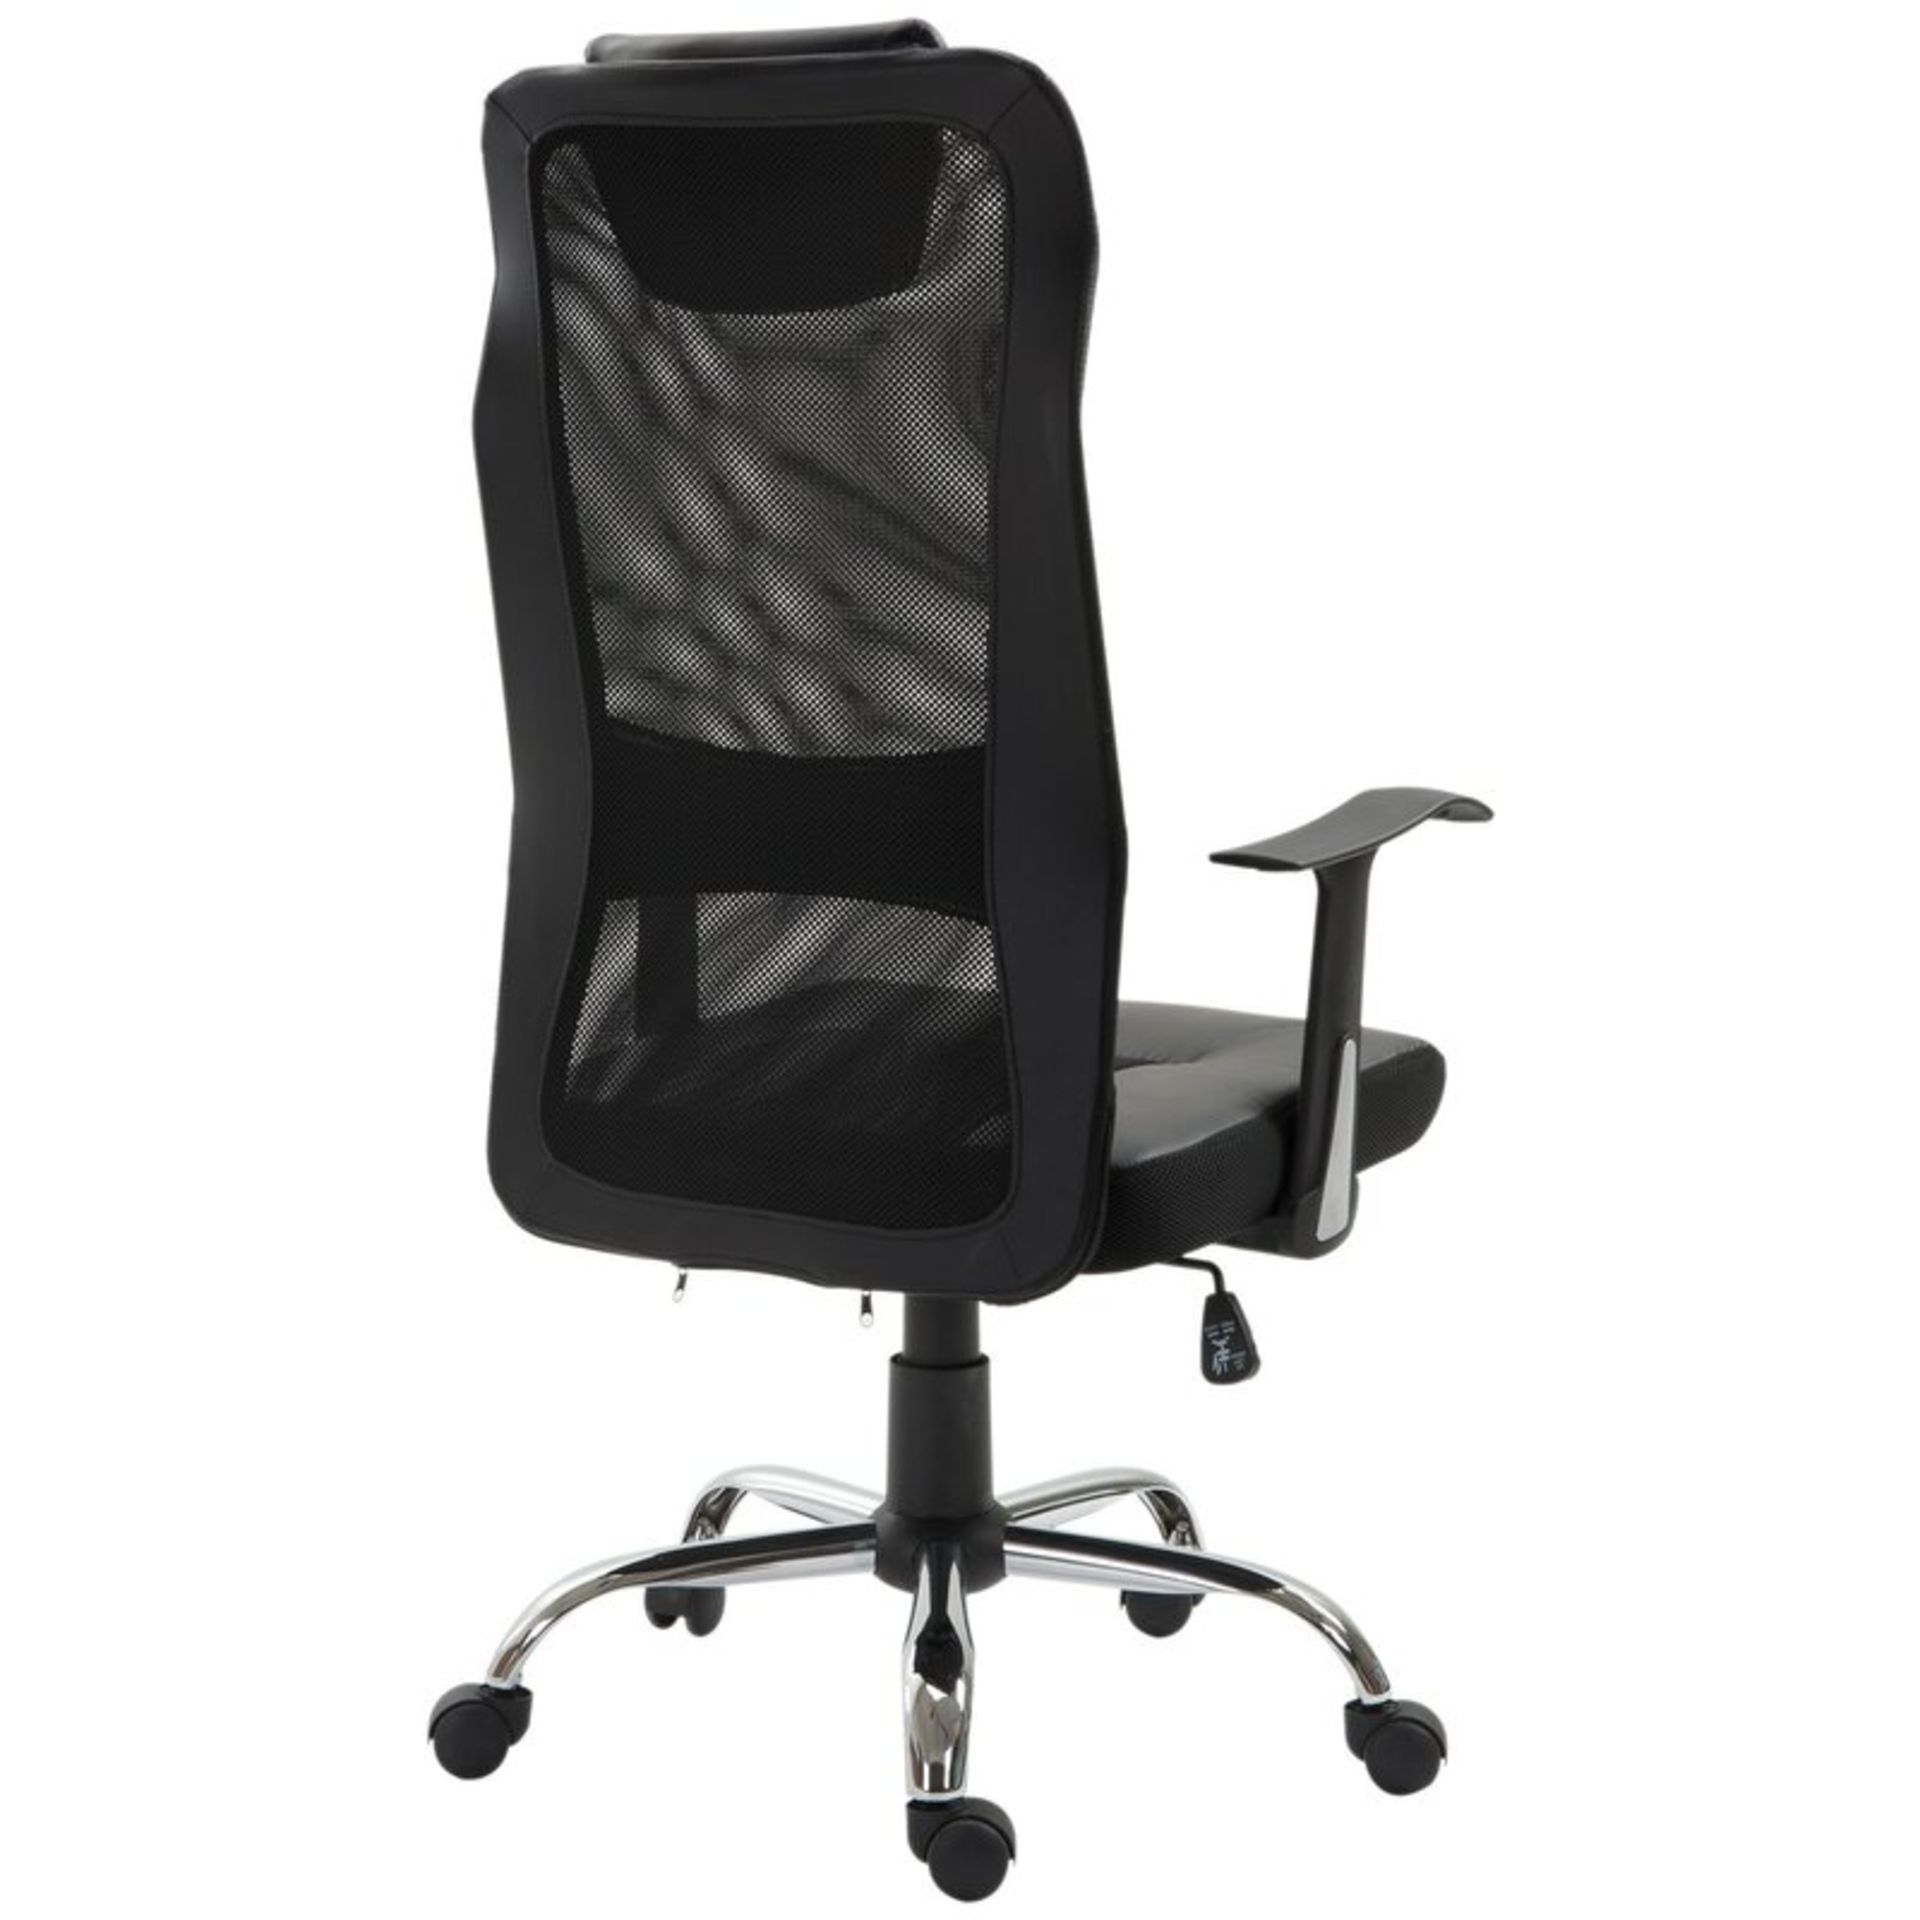 Whipe Mesh Gaming Chair RRP £83.99 - Image 2 of 3